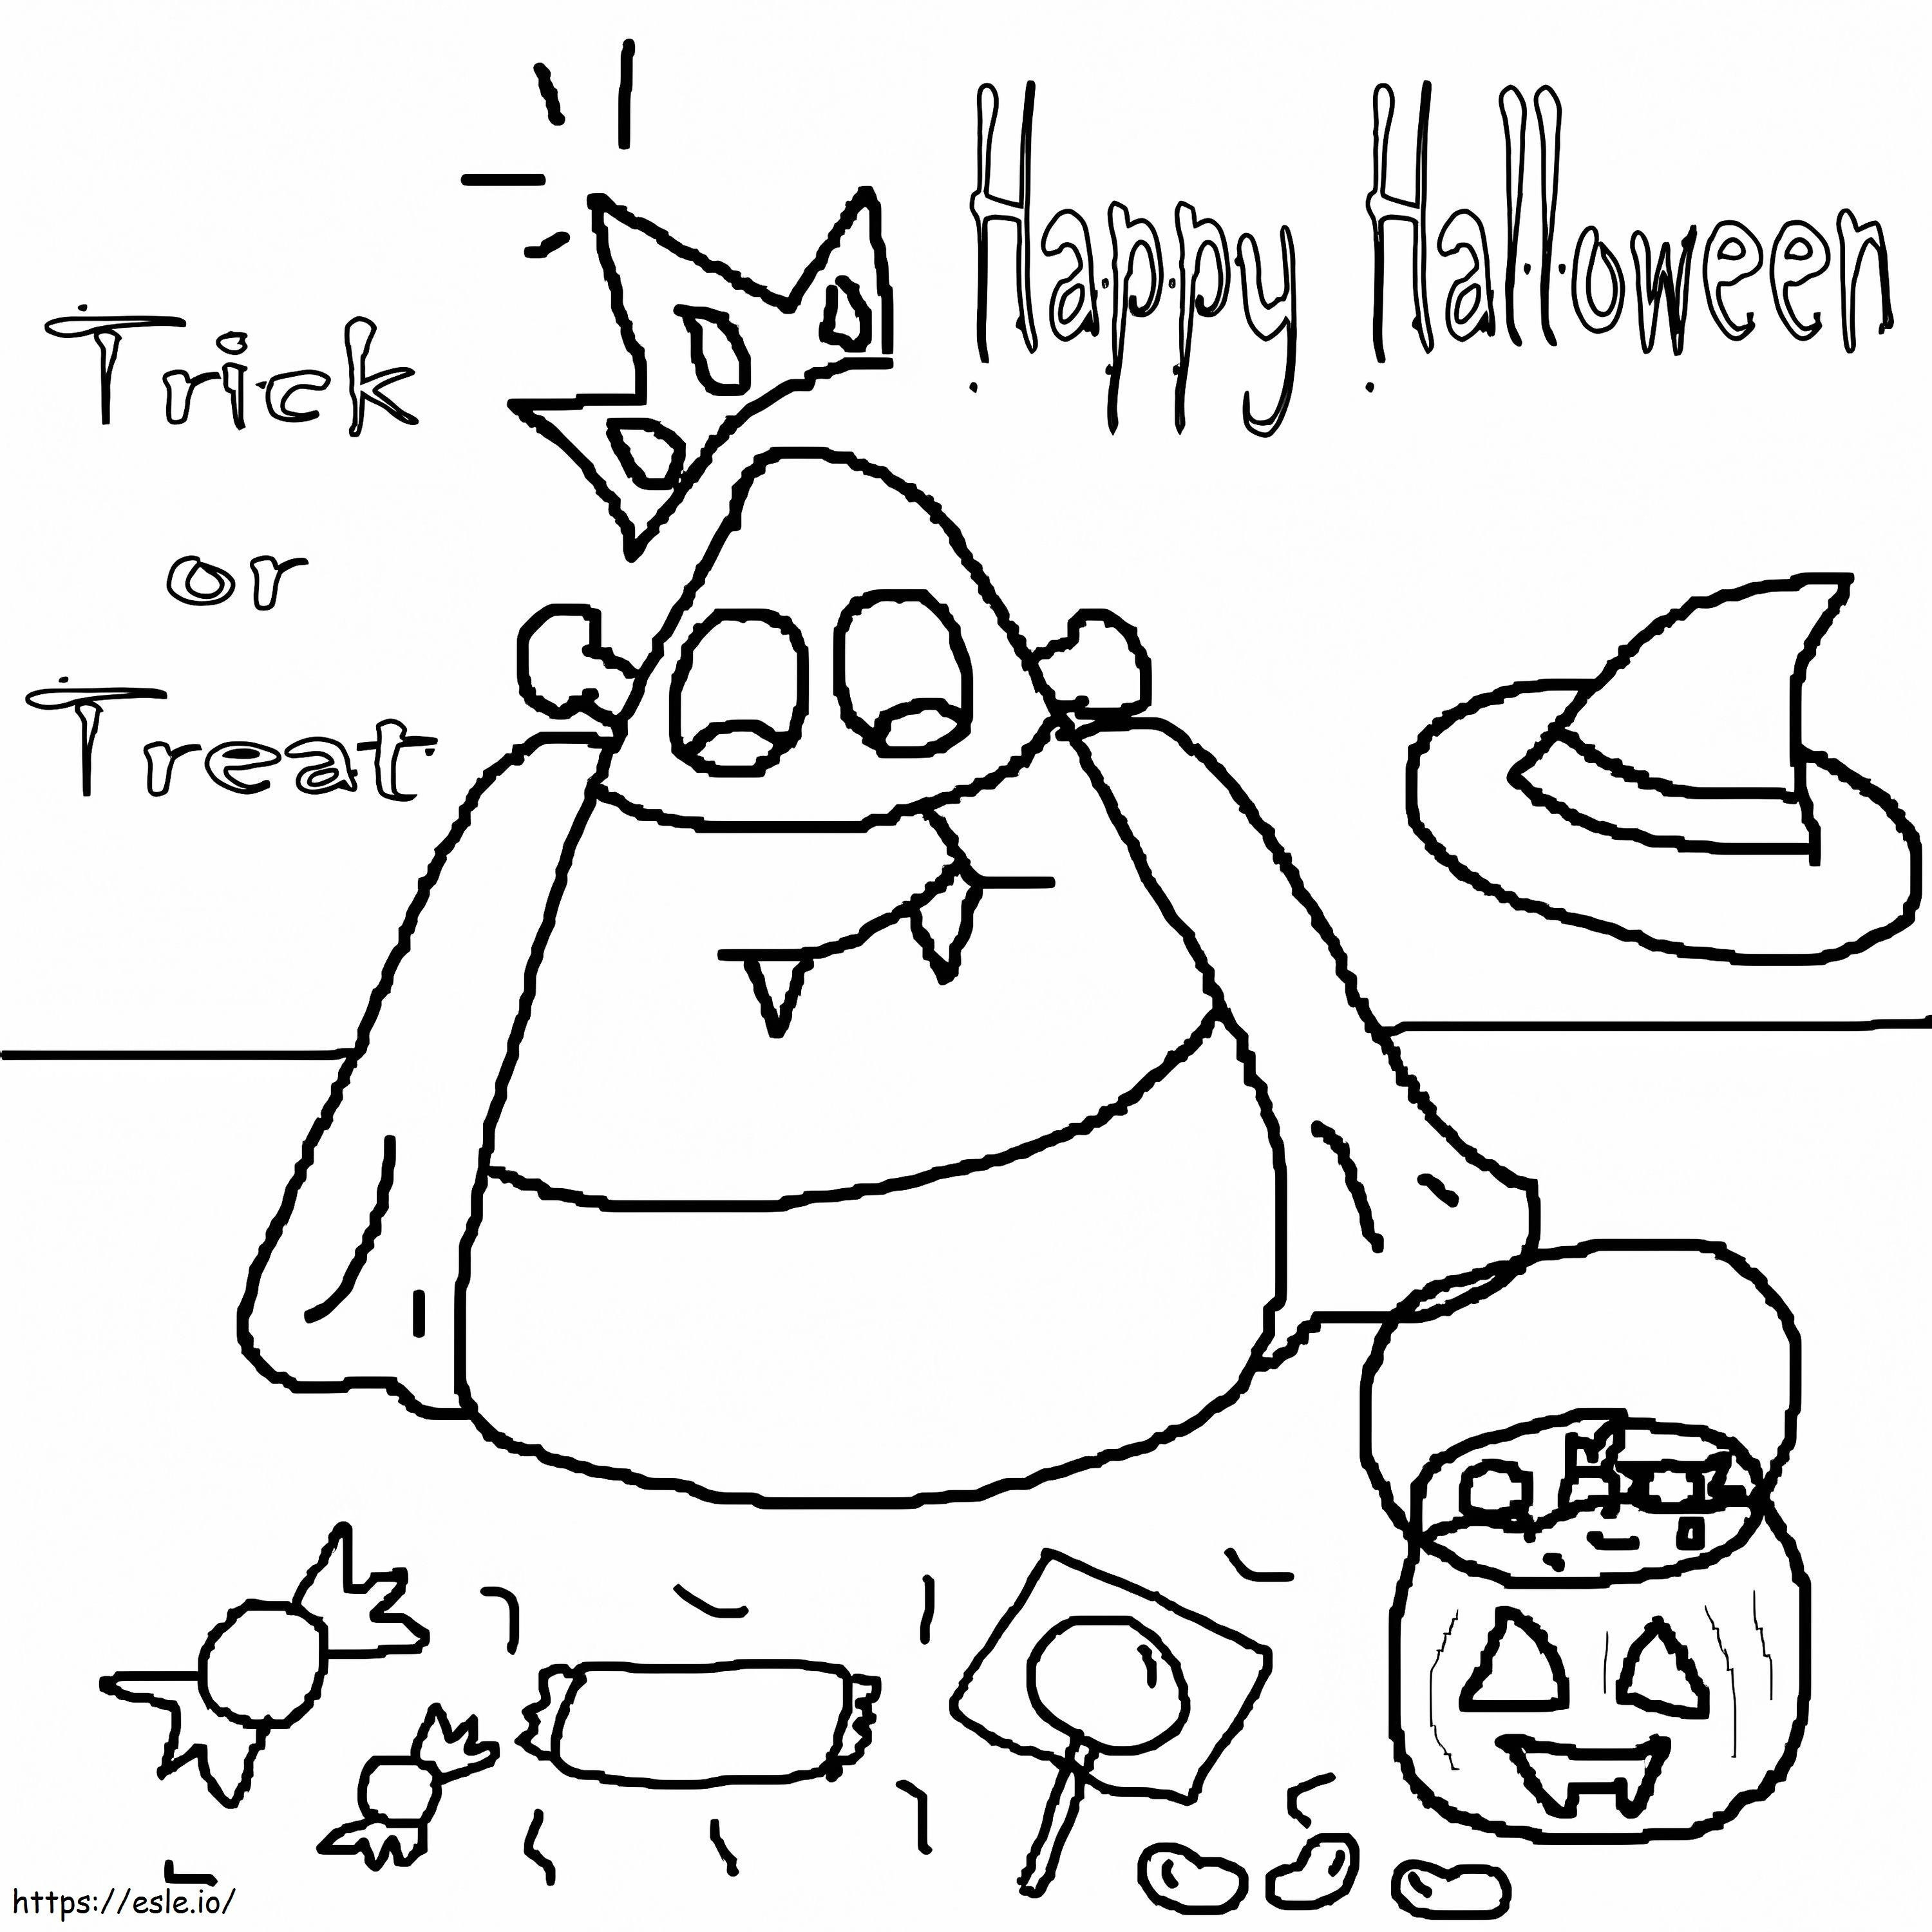 Animated Candy Corn coloring page